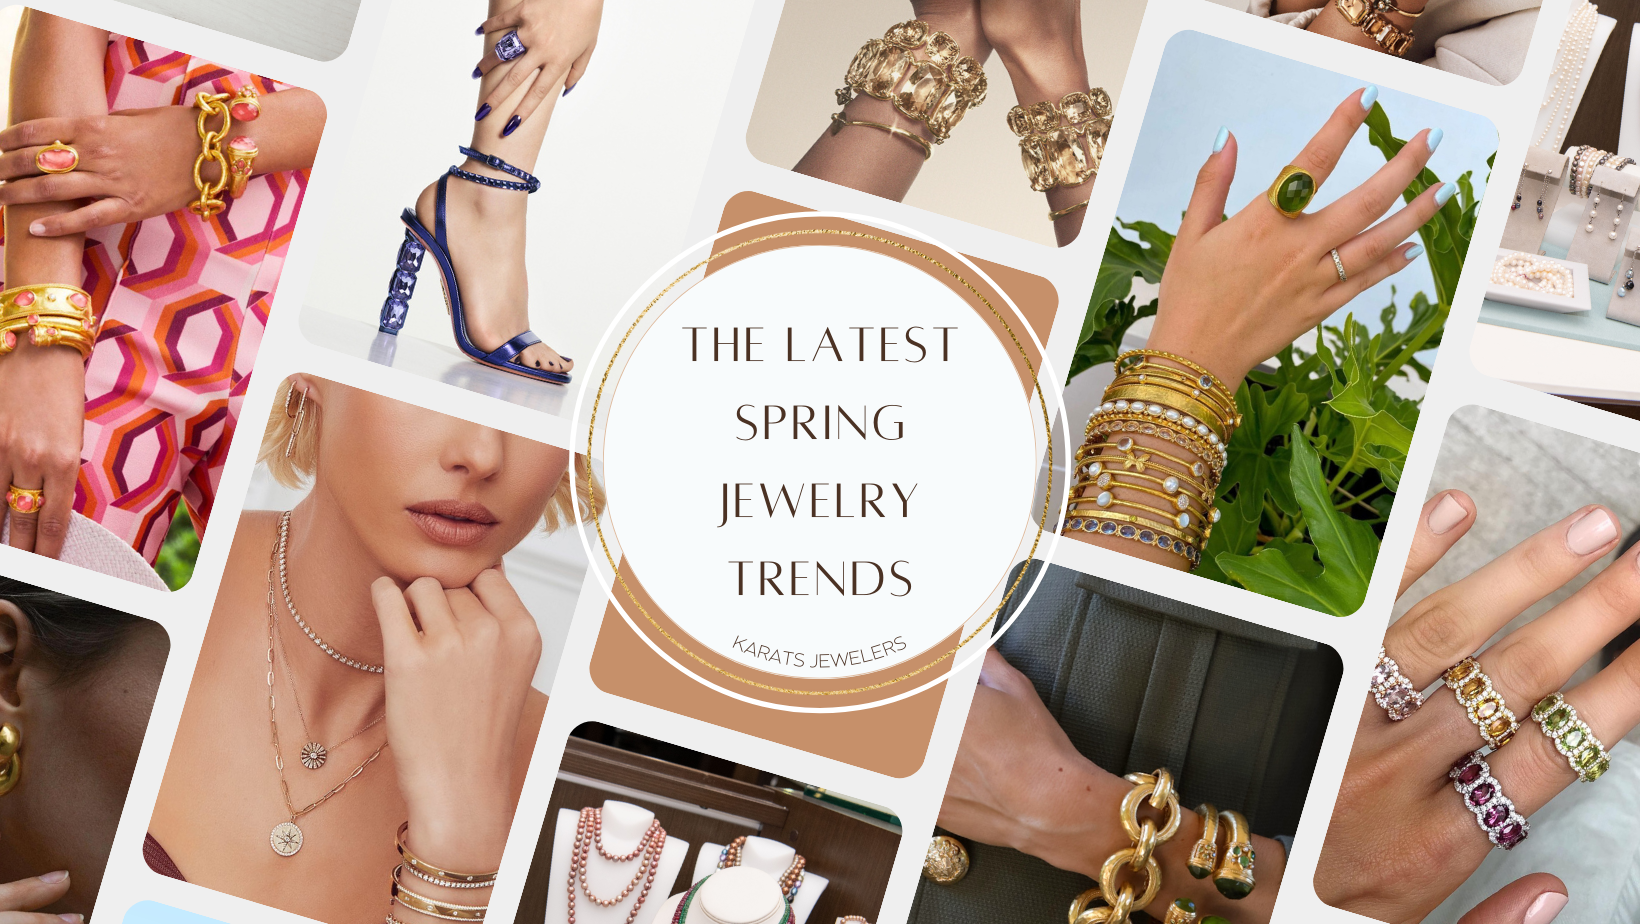 The latest in spring jewelry trends